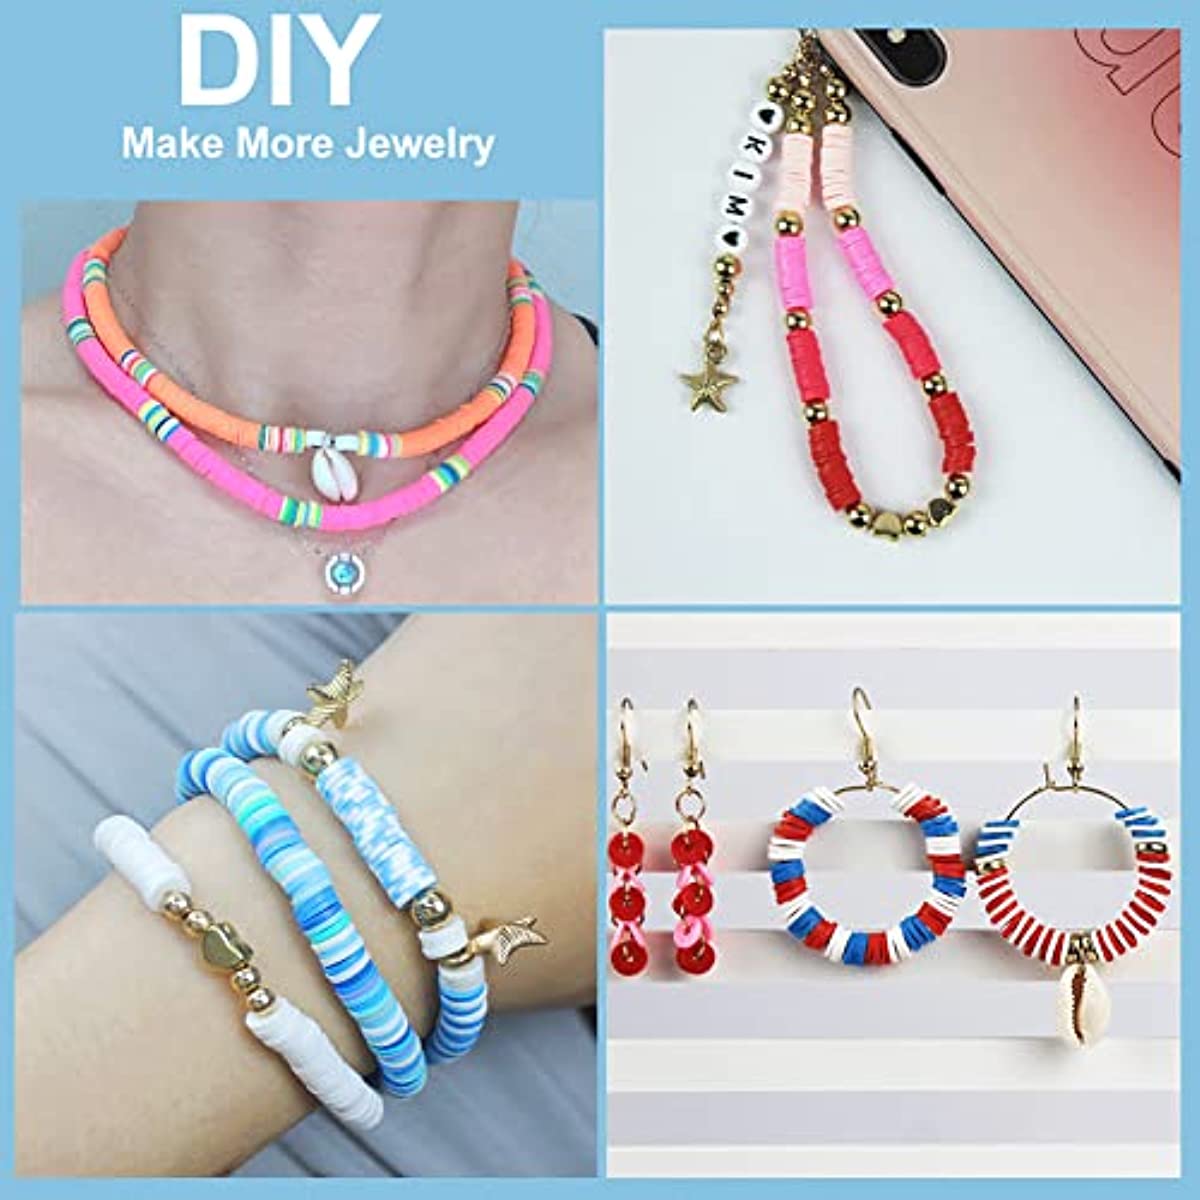 7200 Clay Beads Bracelet DIY Making Kit, 24 Colors Spacer Flat Beads For  Jewelry Making, Polymer Beads With Charms